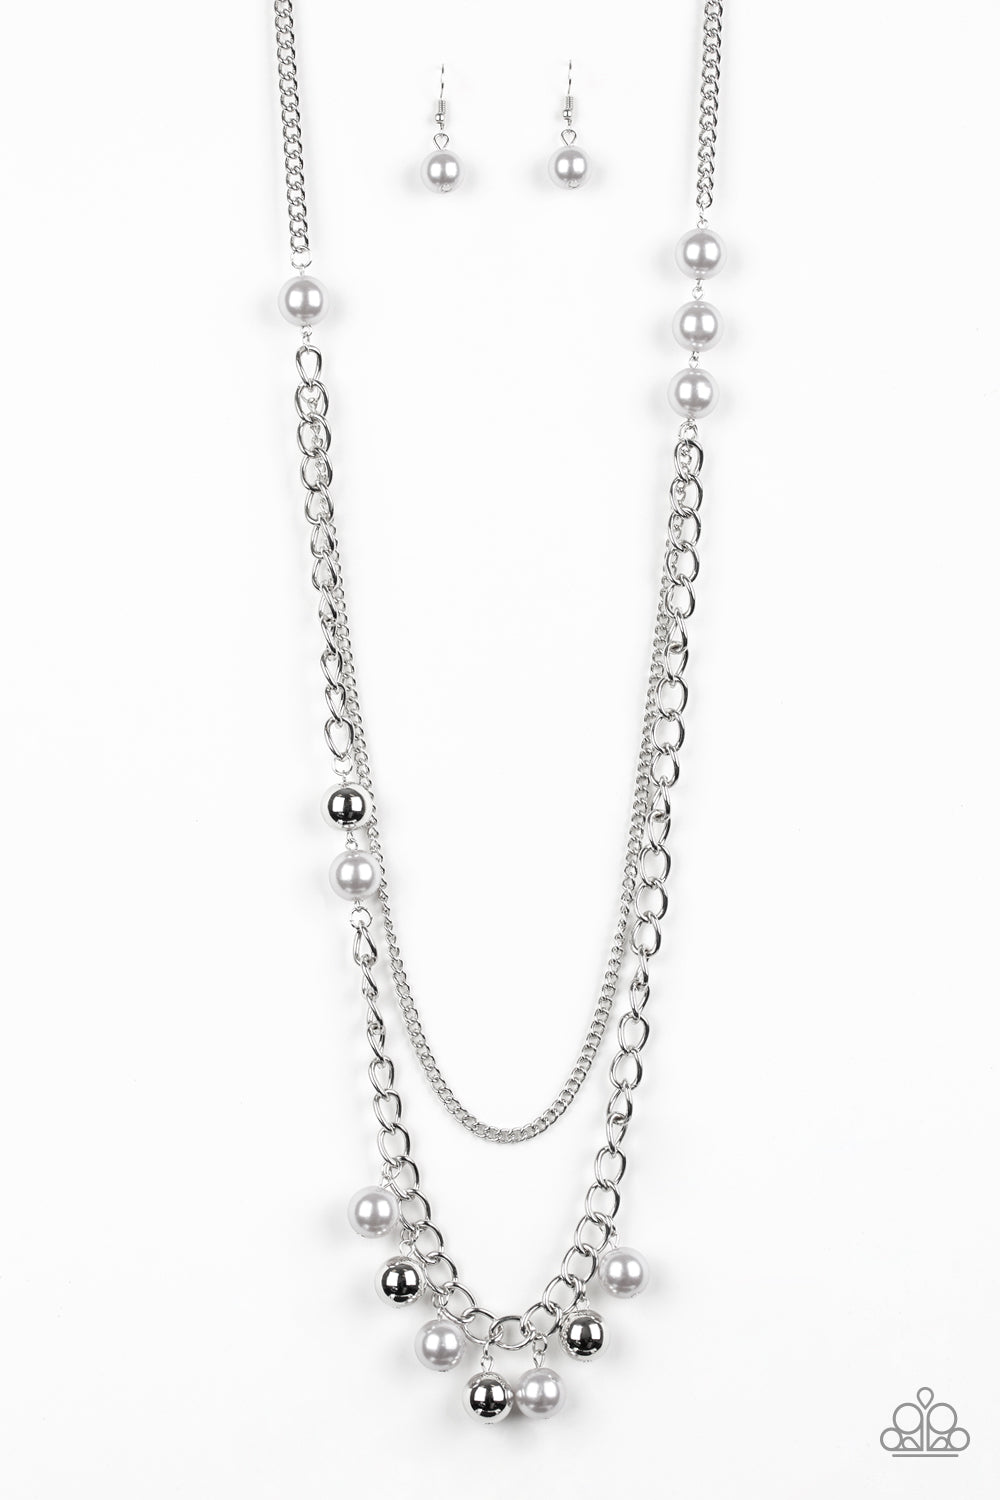 MODERN MUSICAL - SILVER NECKLACE